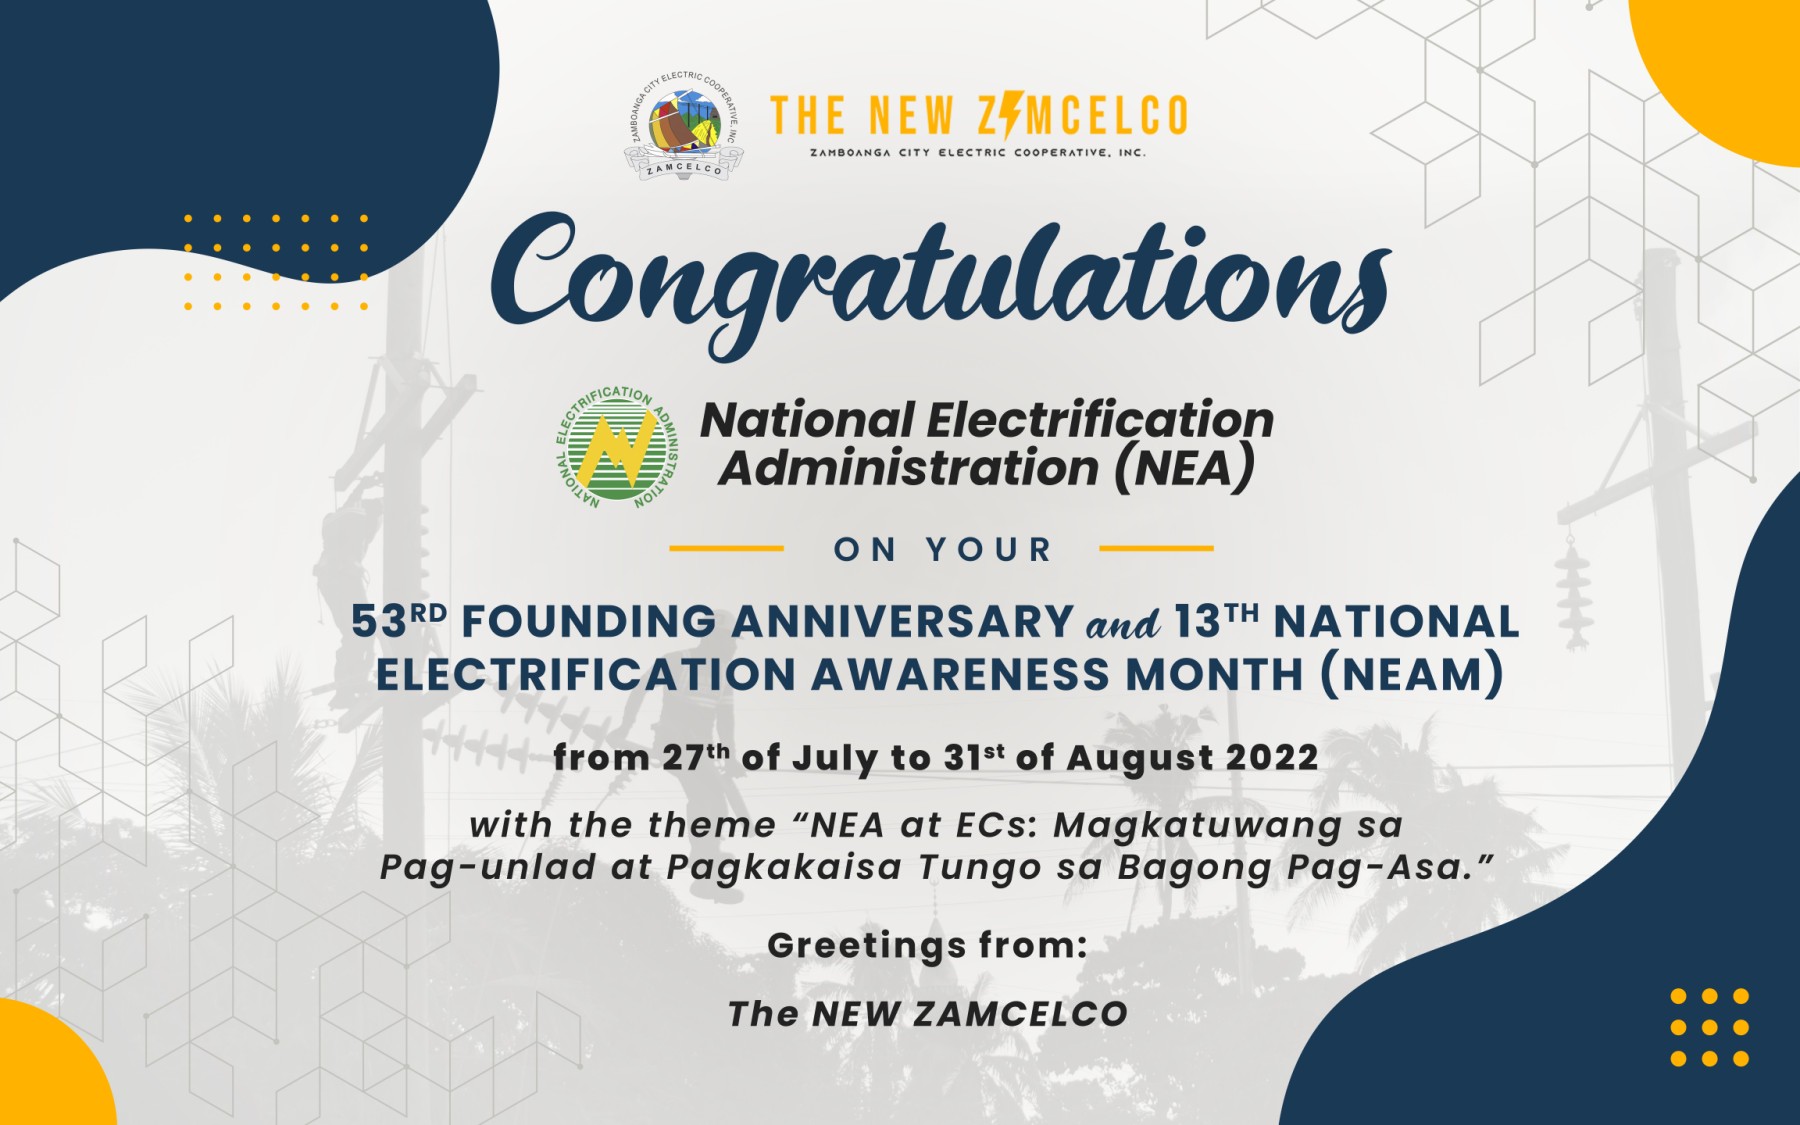 NEA’s 53rd Founding Anniversary and 13th National Electrification Awareness Month (NEAM)